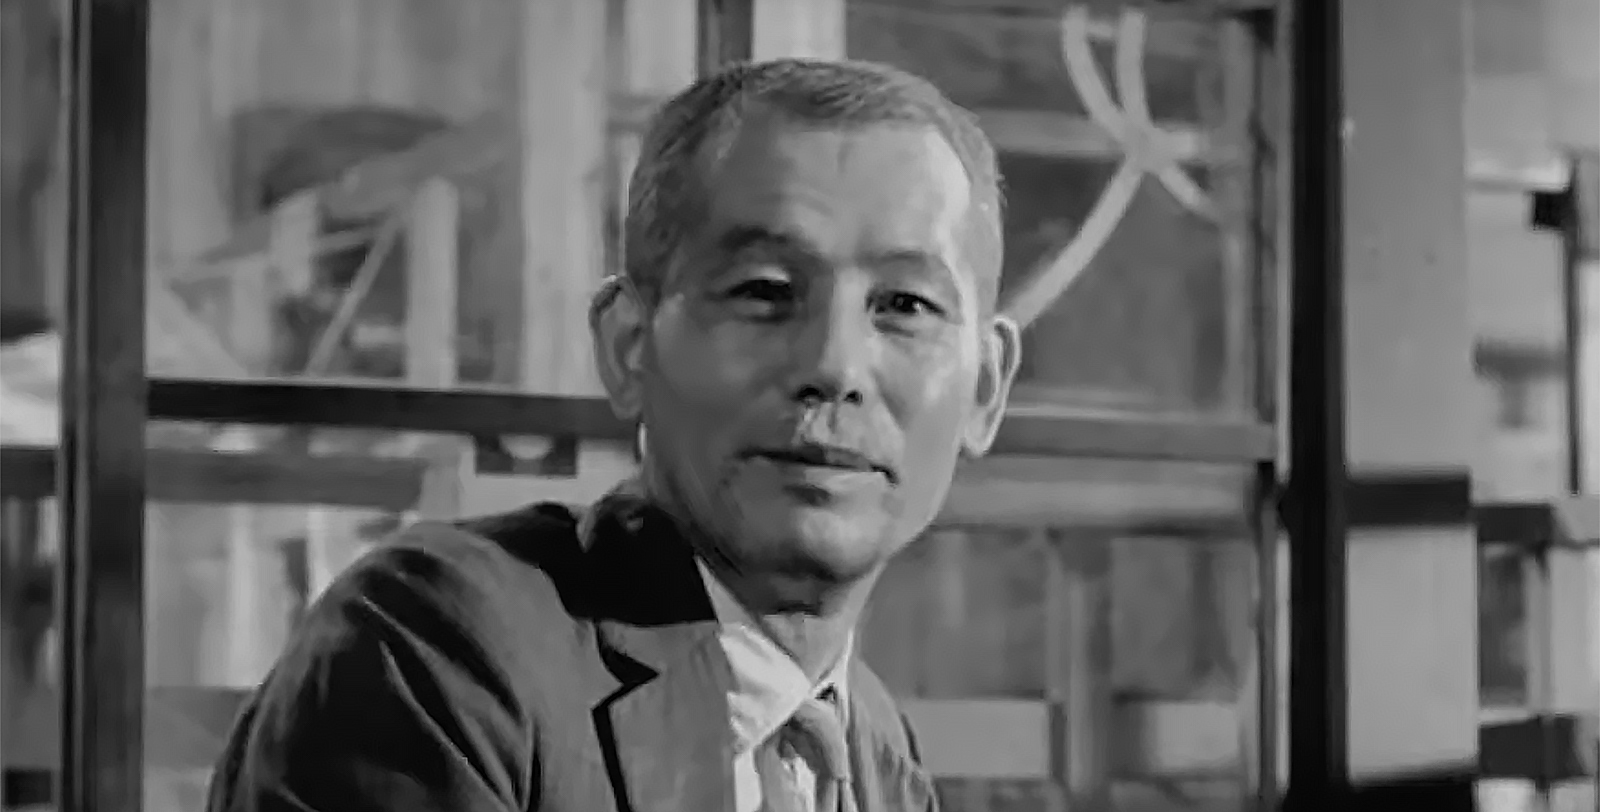 Having broken the 180-degree rule, the actor’s eyeline was no longer correct in Tokyo Story.